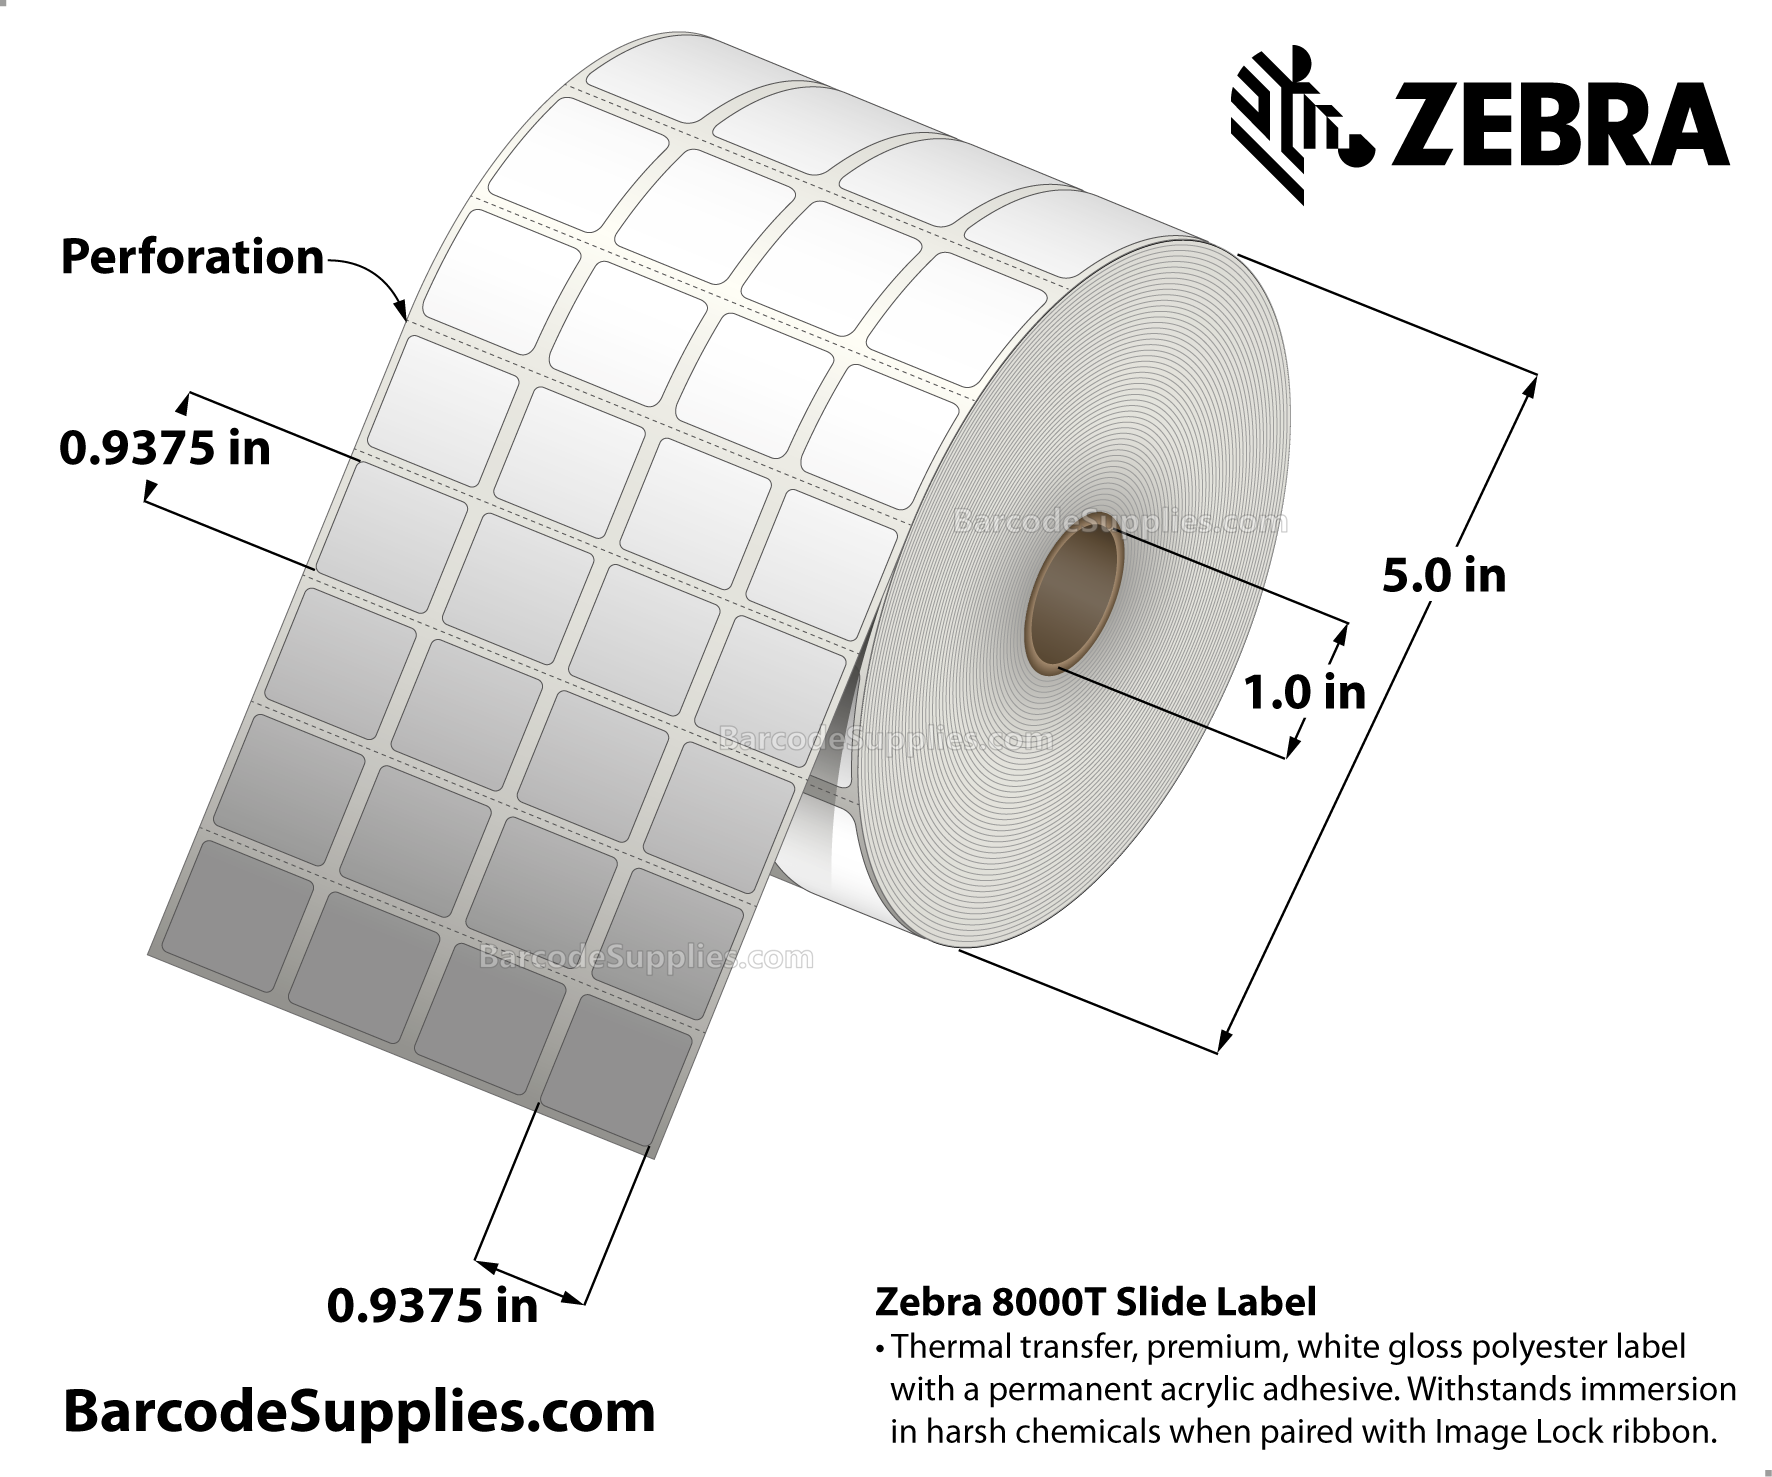 0.9375 x 0.9375 Thermal Transfer White 8000T Slide (4-Across) Labels With Permanent Adhesive - Perforated - 10048 Labels Per Roll - Carton Of 4 Rolls - 40192 Labels Total - MPN: 10034220